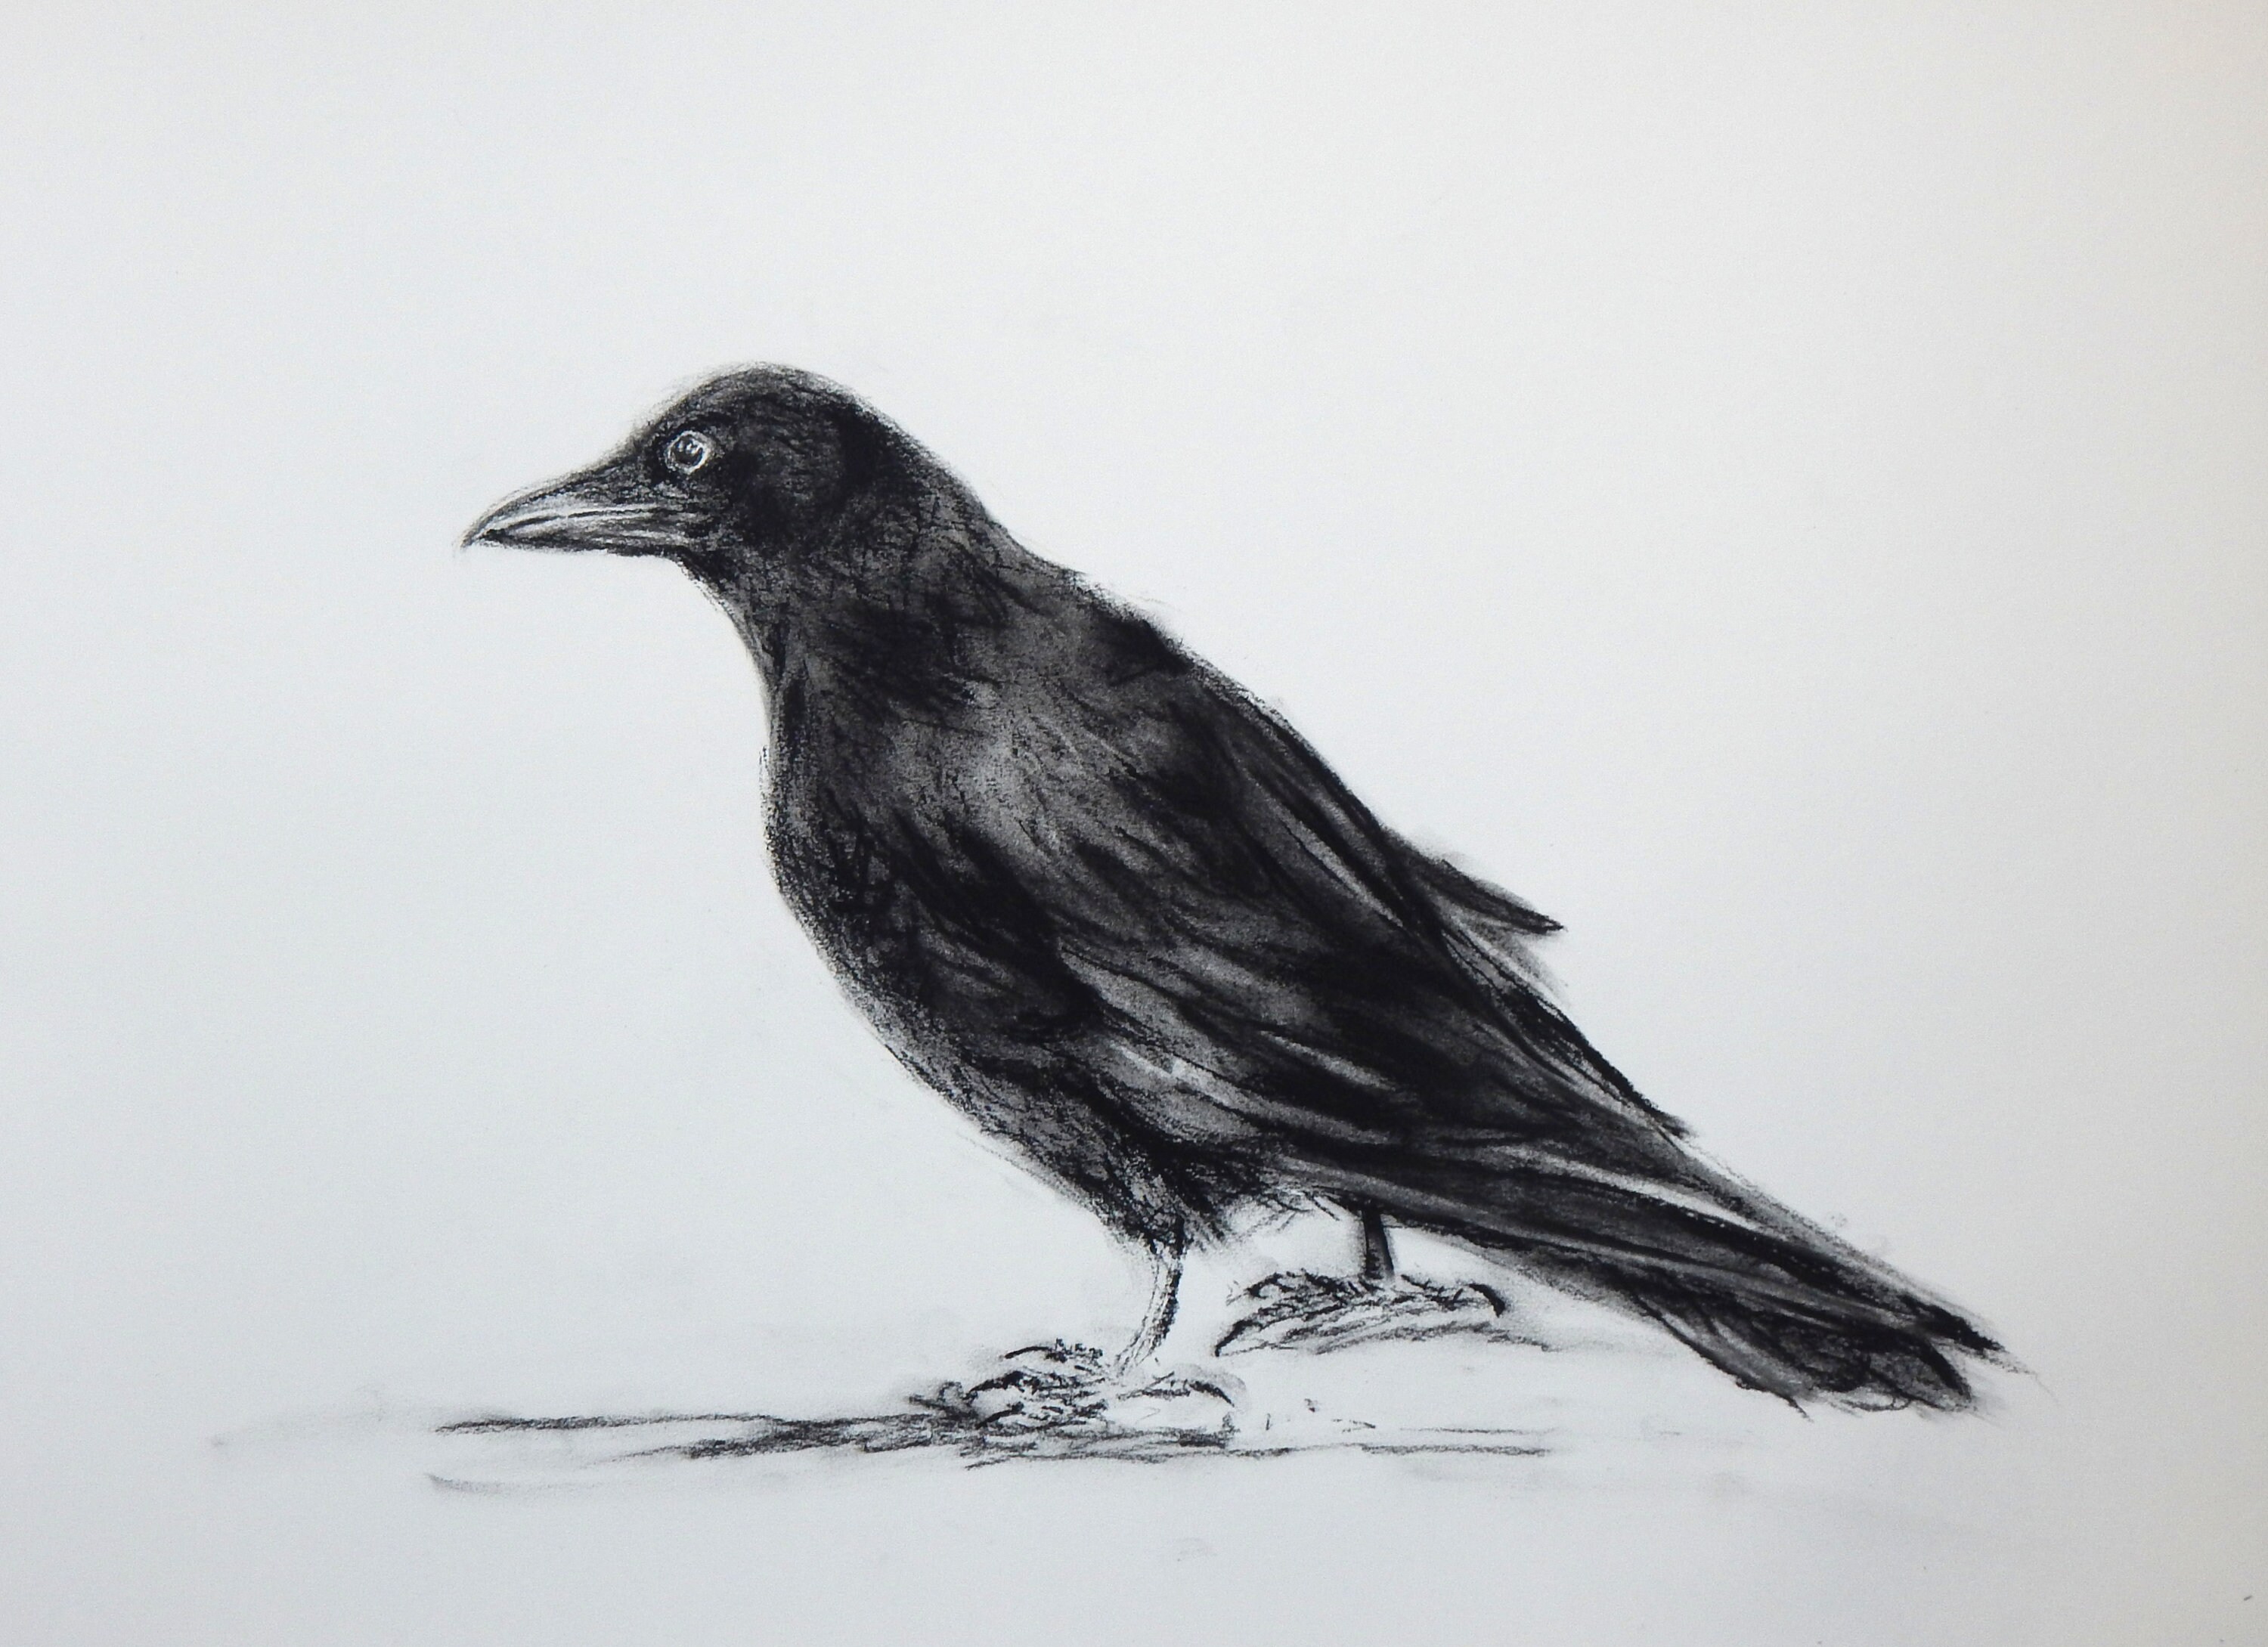 Charcoal drawing of a Crow by p3vstudio on DeviantArt